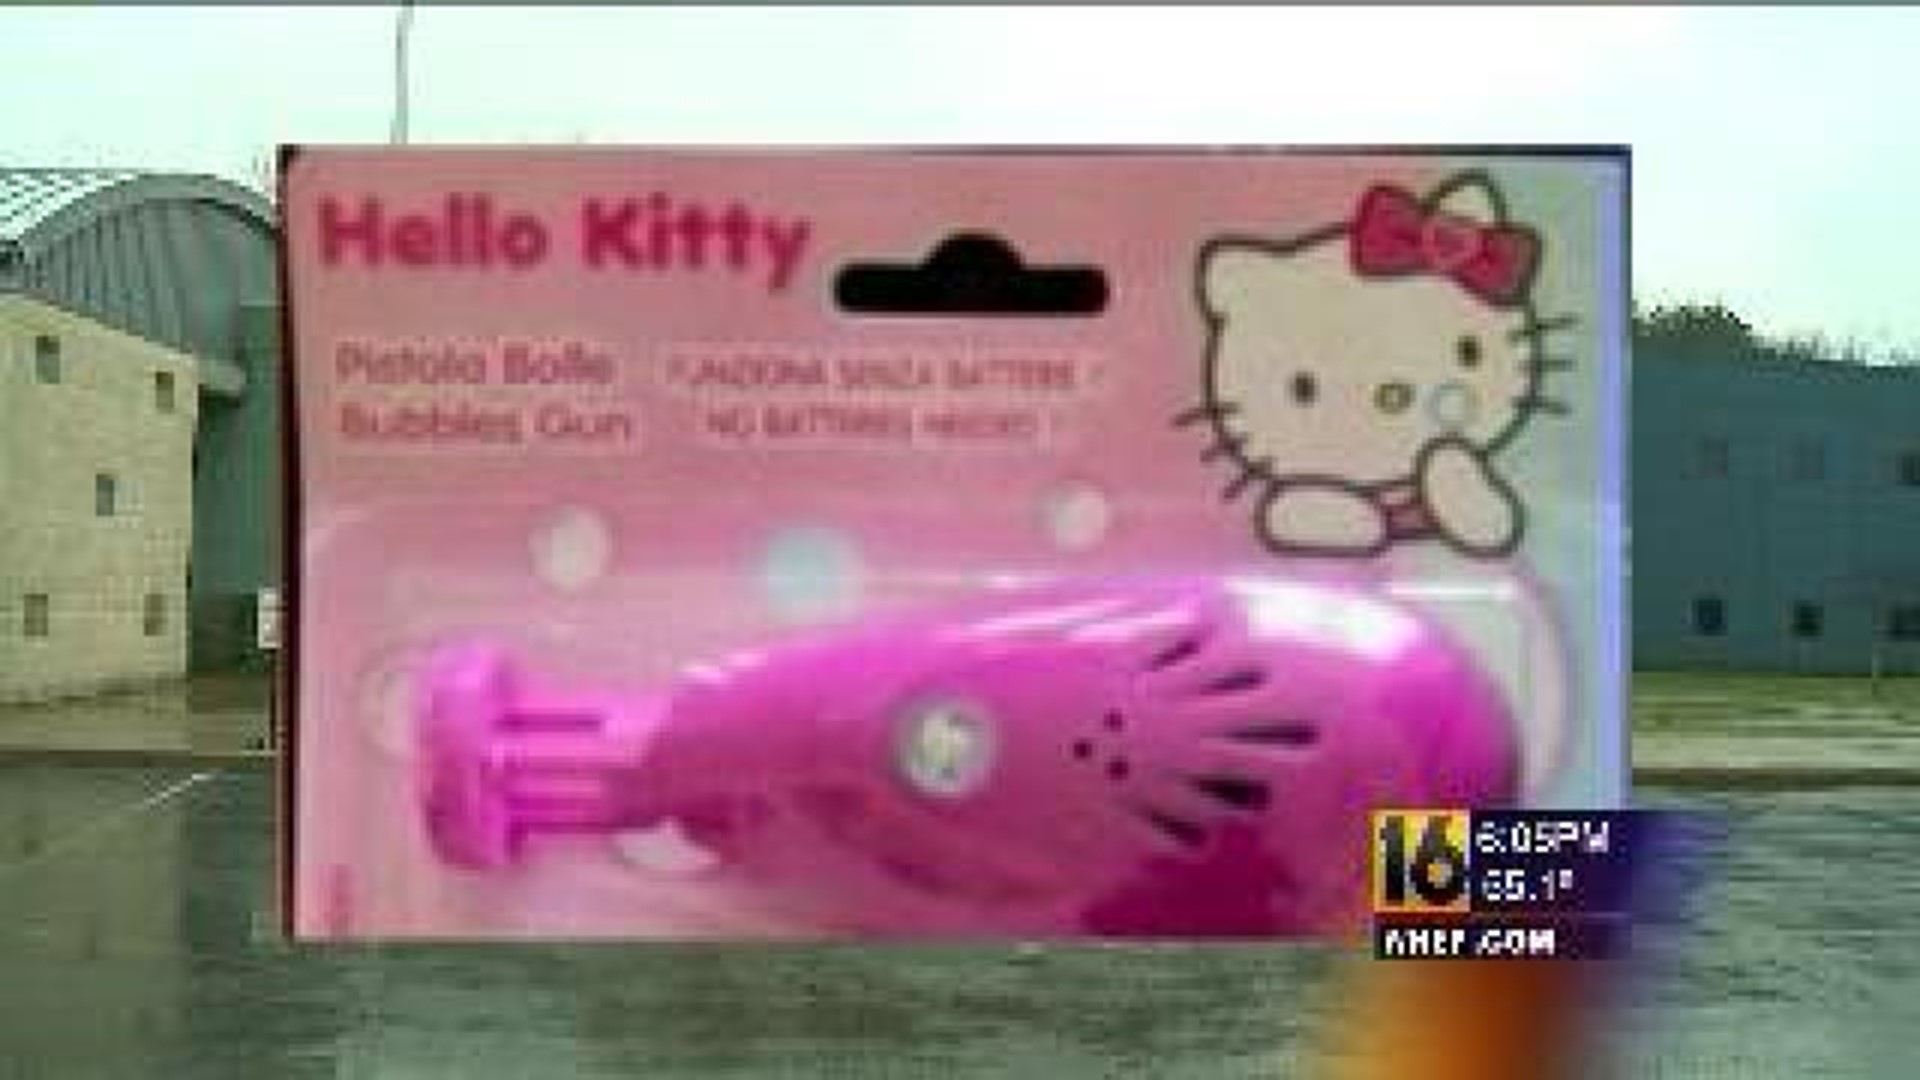 School Board Erases Suspension of 5-Year-Old with "Hello Kitty" Gun